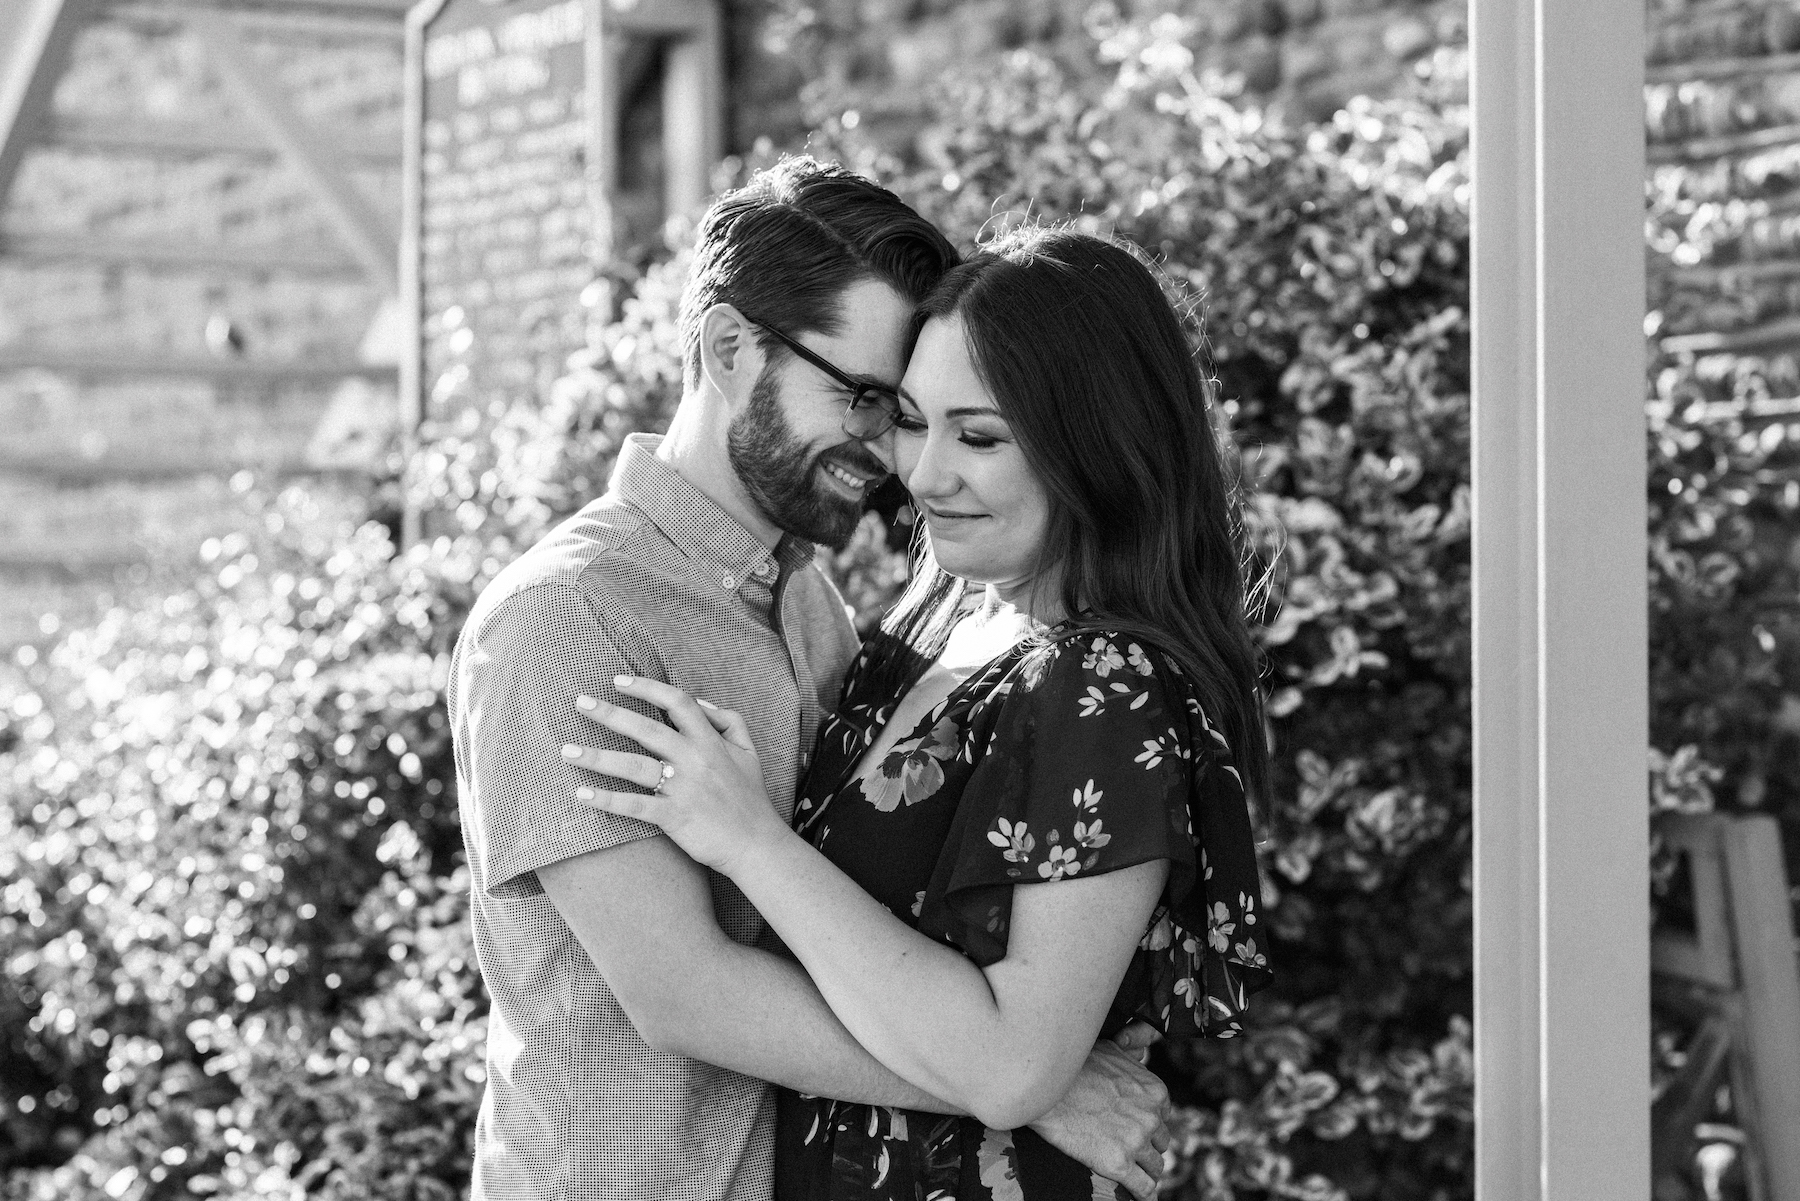 Black and white image of a couple embracing and smiling.